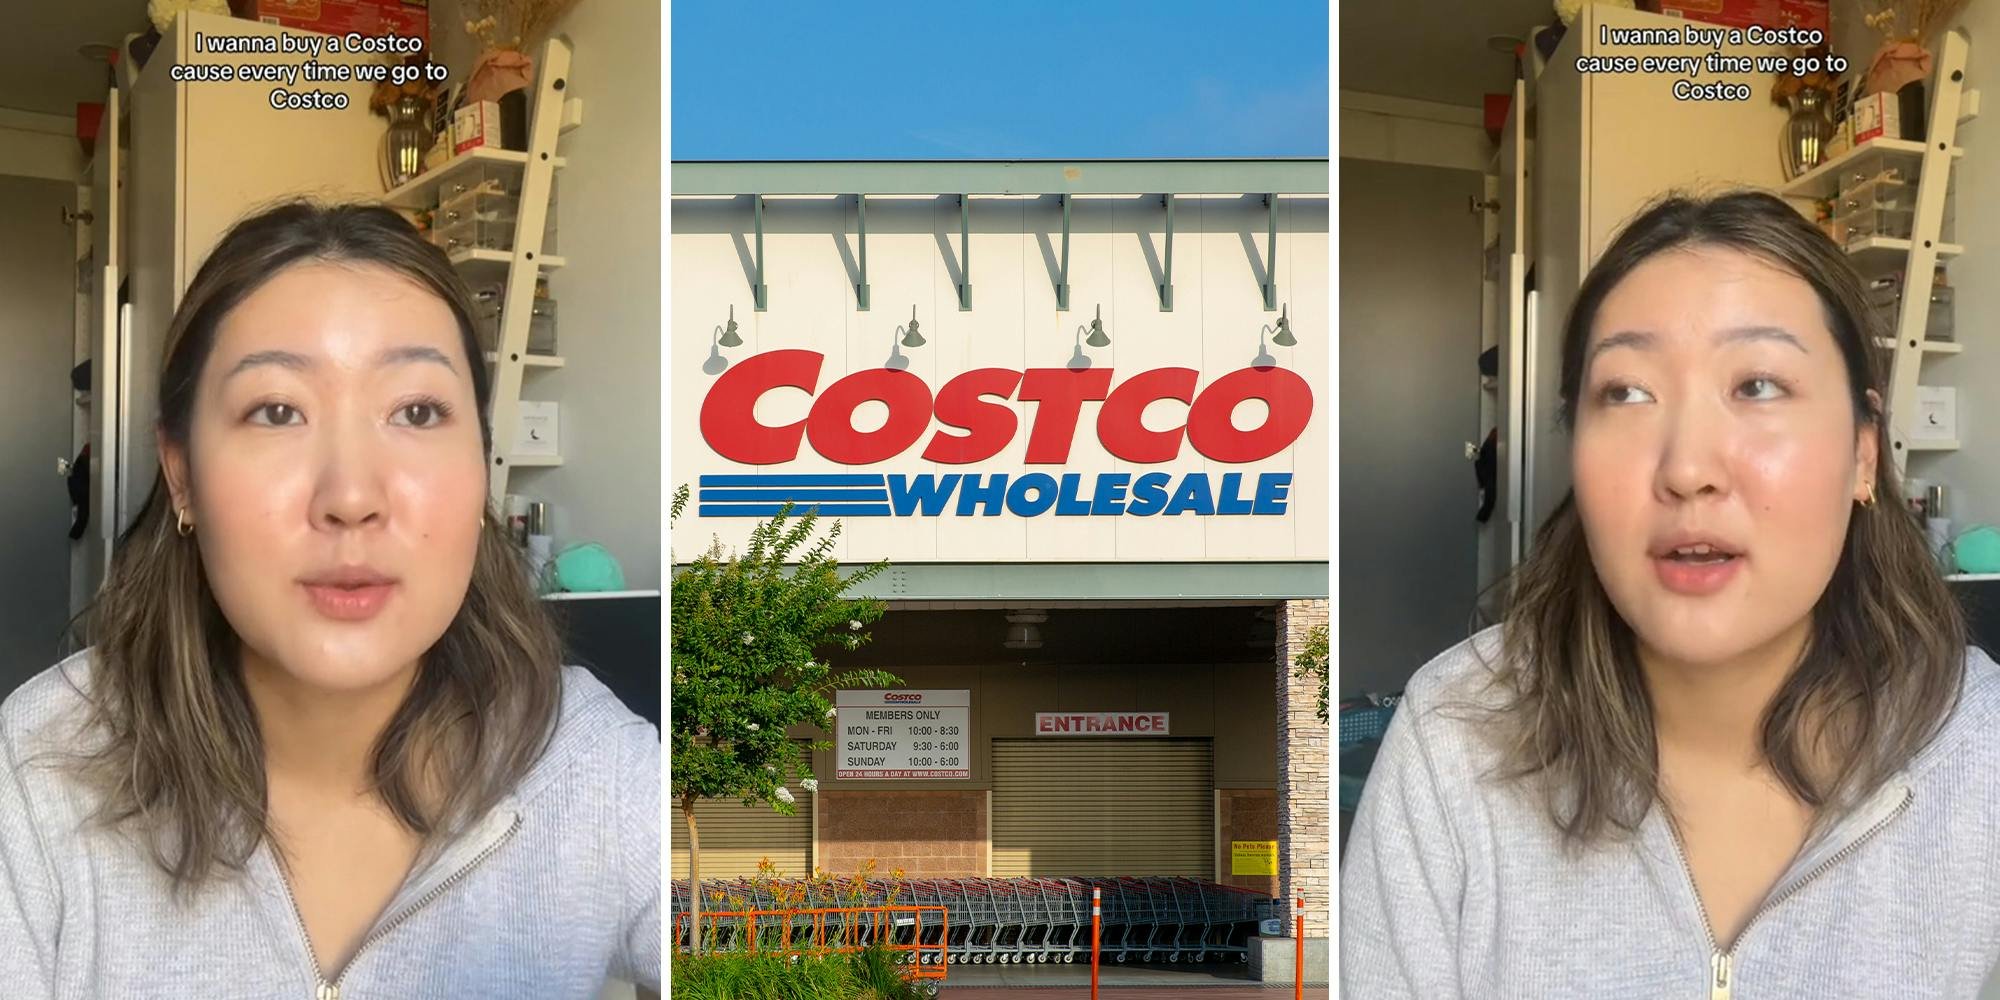 'I thought it was gonna be a couple of dollars': Costco overcharged customer on sales tax. They sent her a gift card a year later